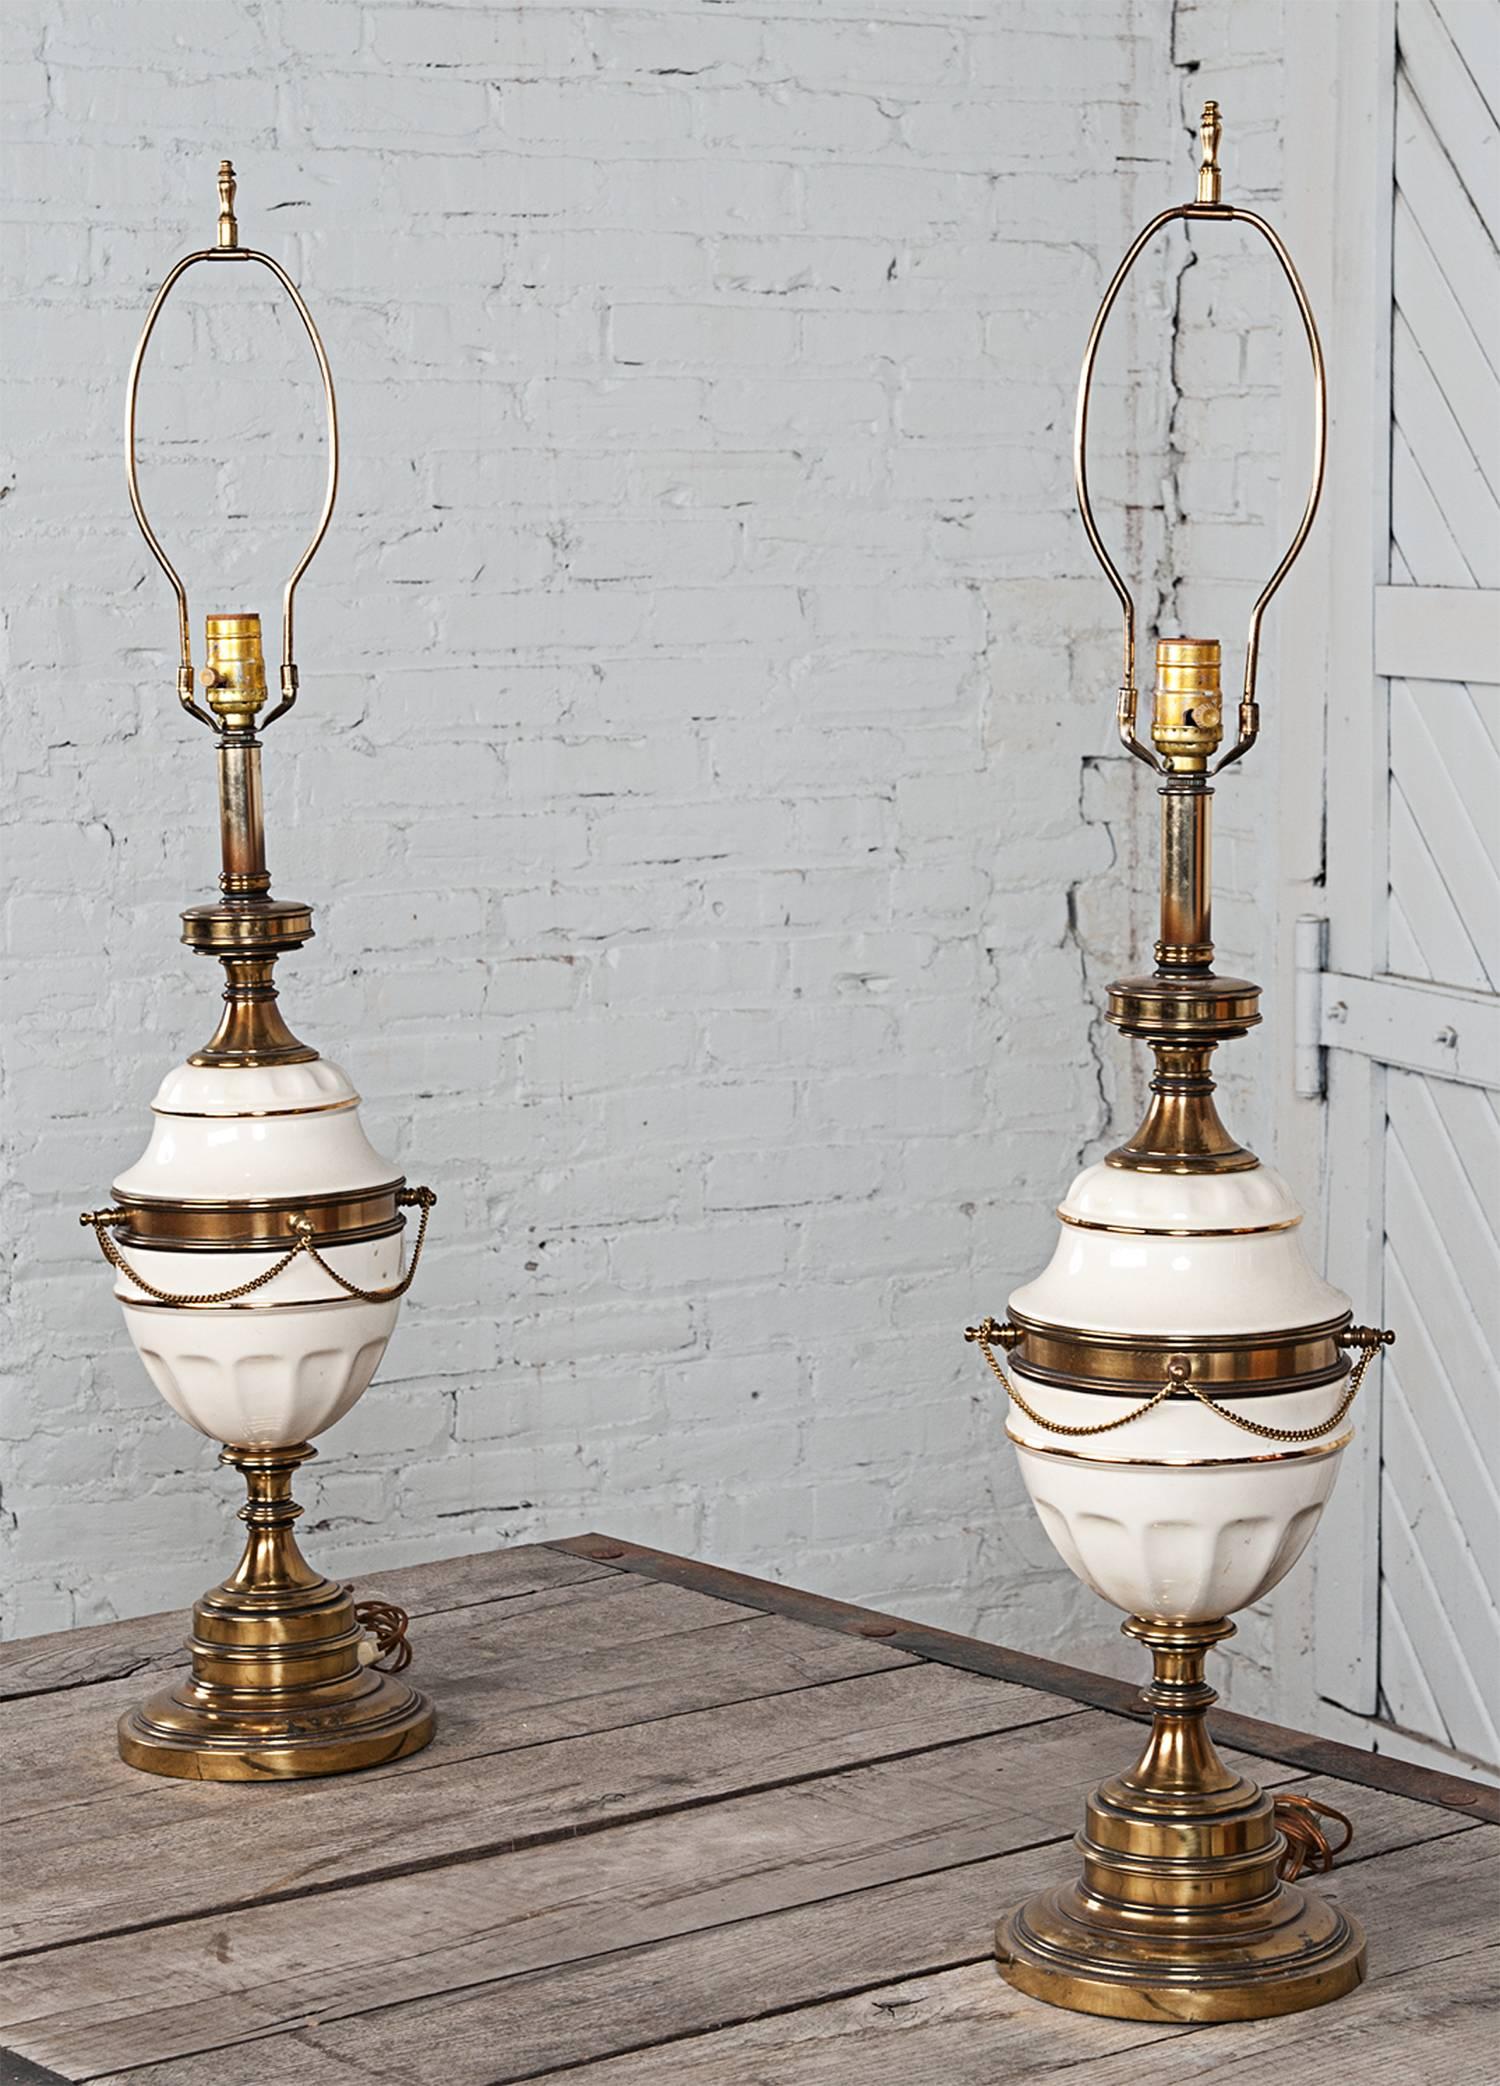 These elegant lamps are white ceramic with gold tone accents. Reminiscent of Stiffel but not marked. Sold as a pair only. Lampshades are included if you so desire and are original. All wiring has been checked and lamps are safe and functional. They